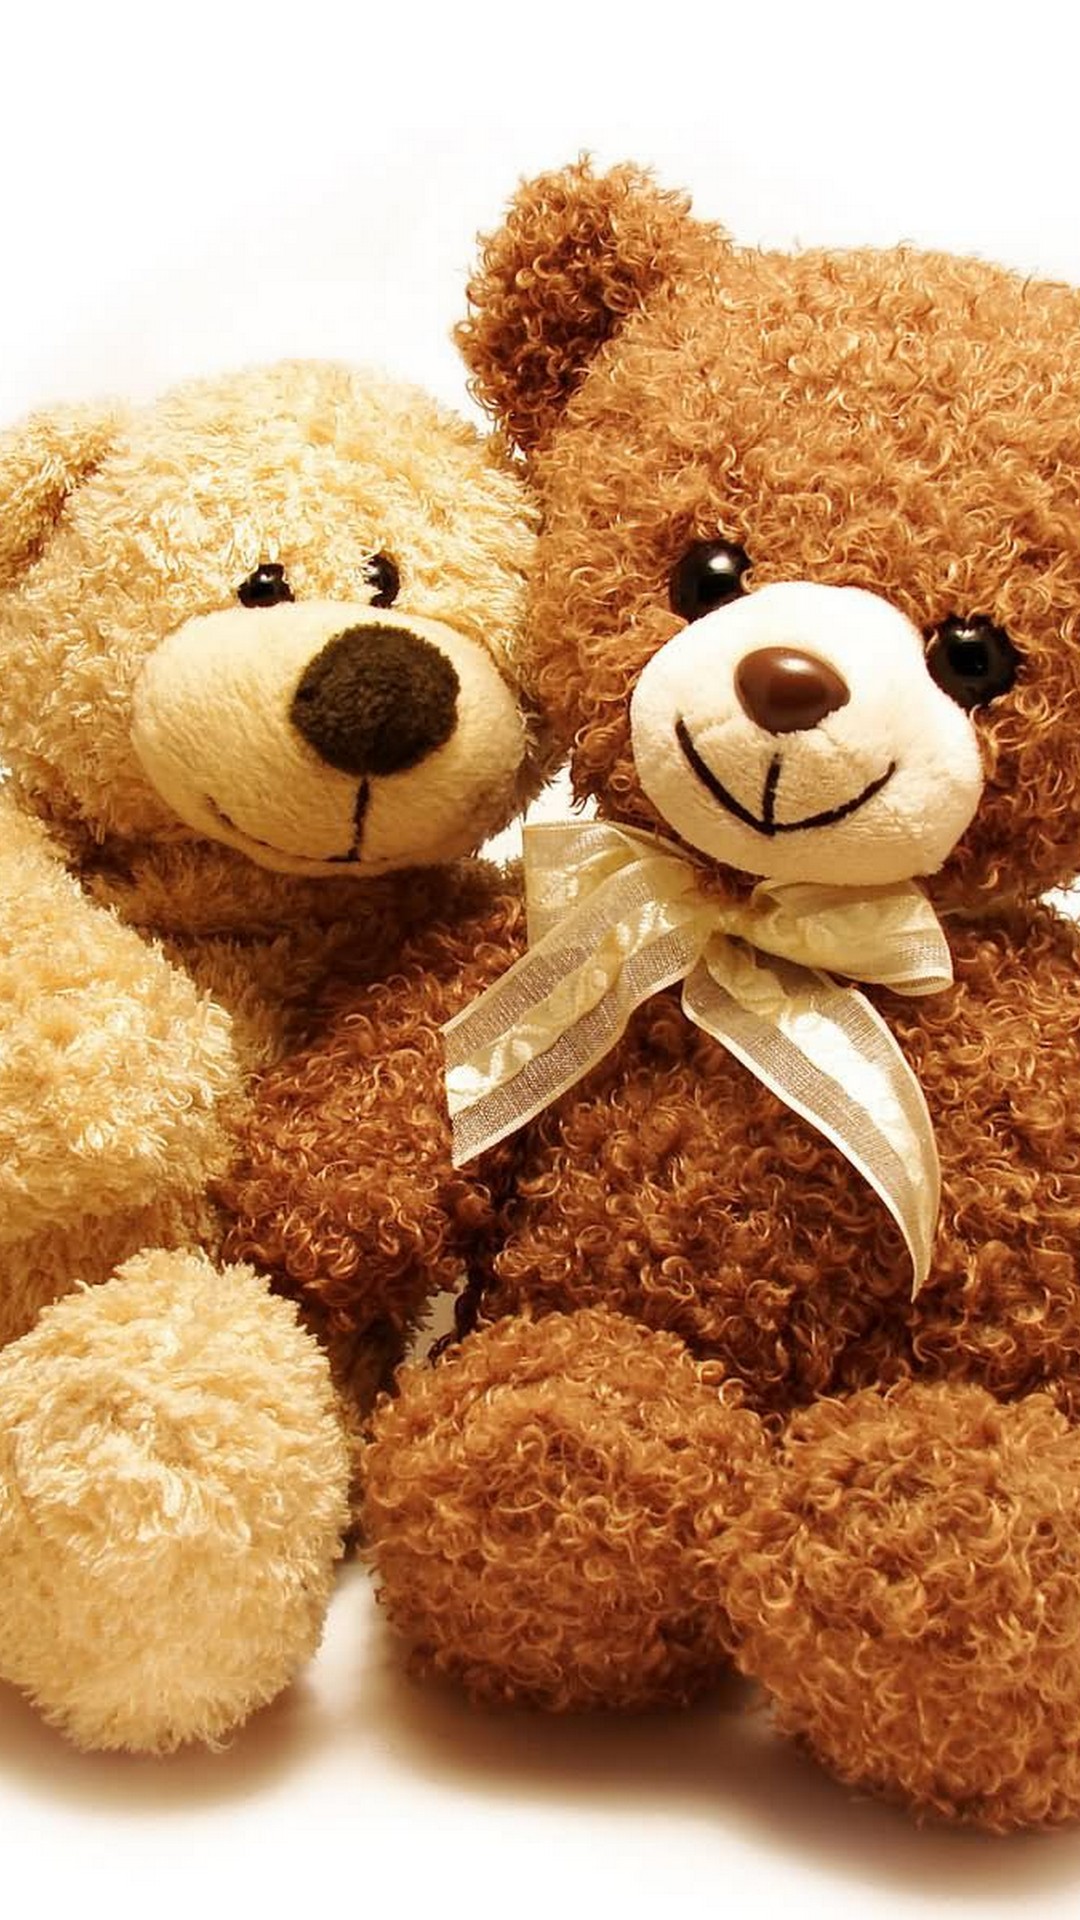 Teddy Bear Giant Android Wallpaper - 2021 Android Wallpapers